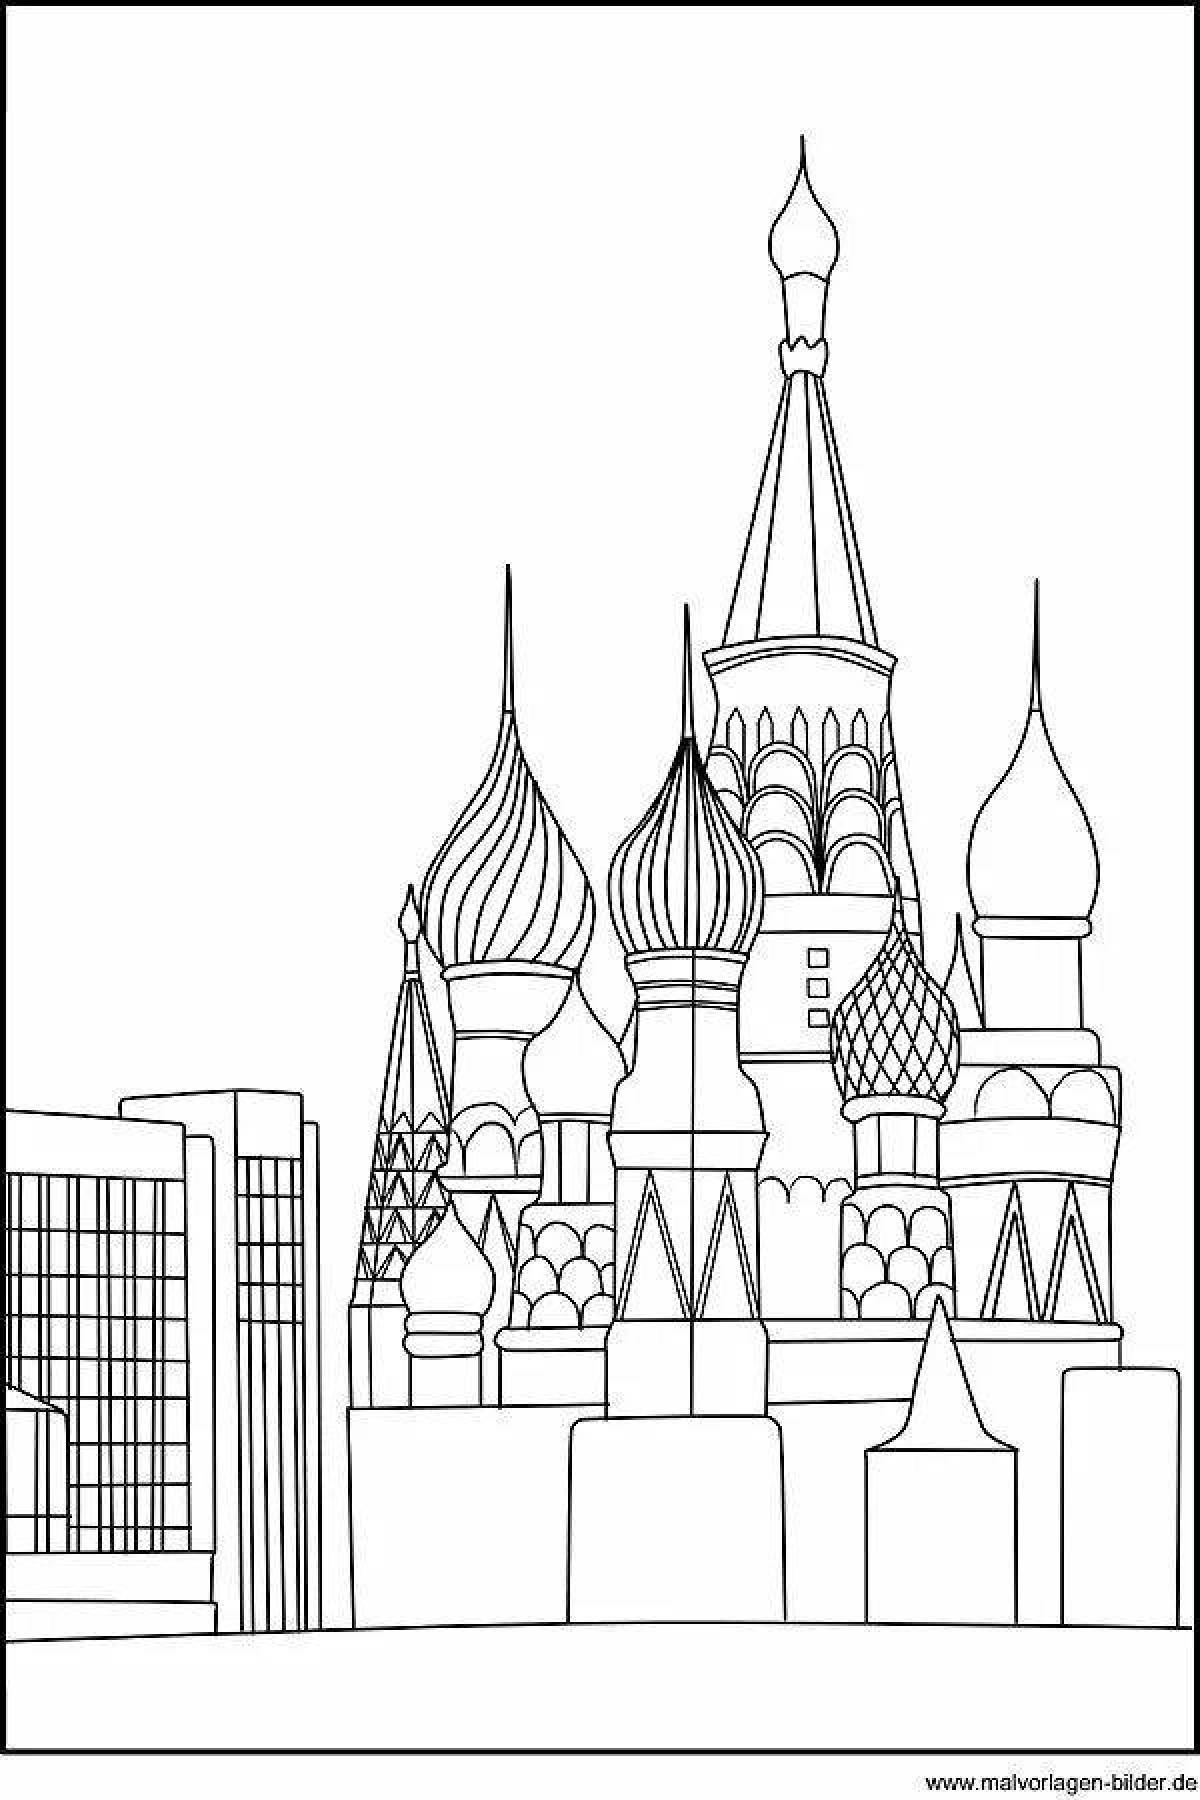 Exclusive Moscow coloring book for kids